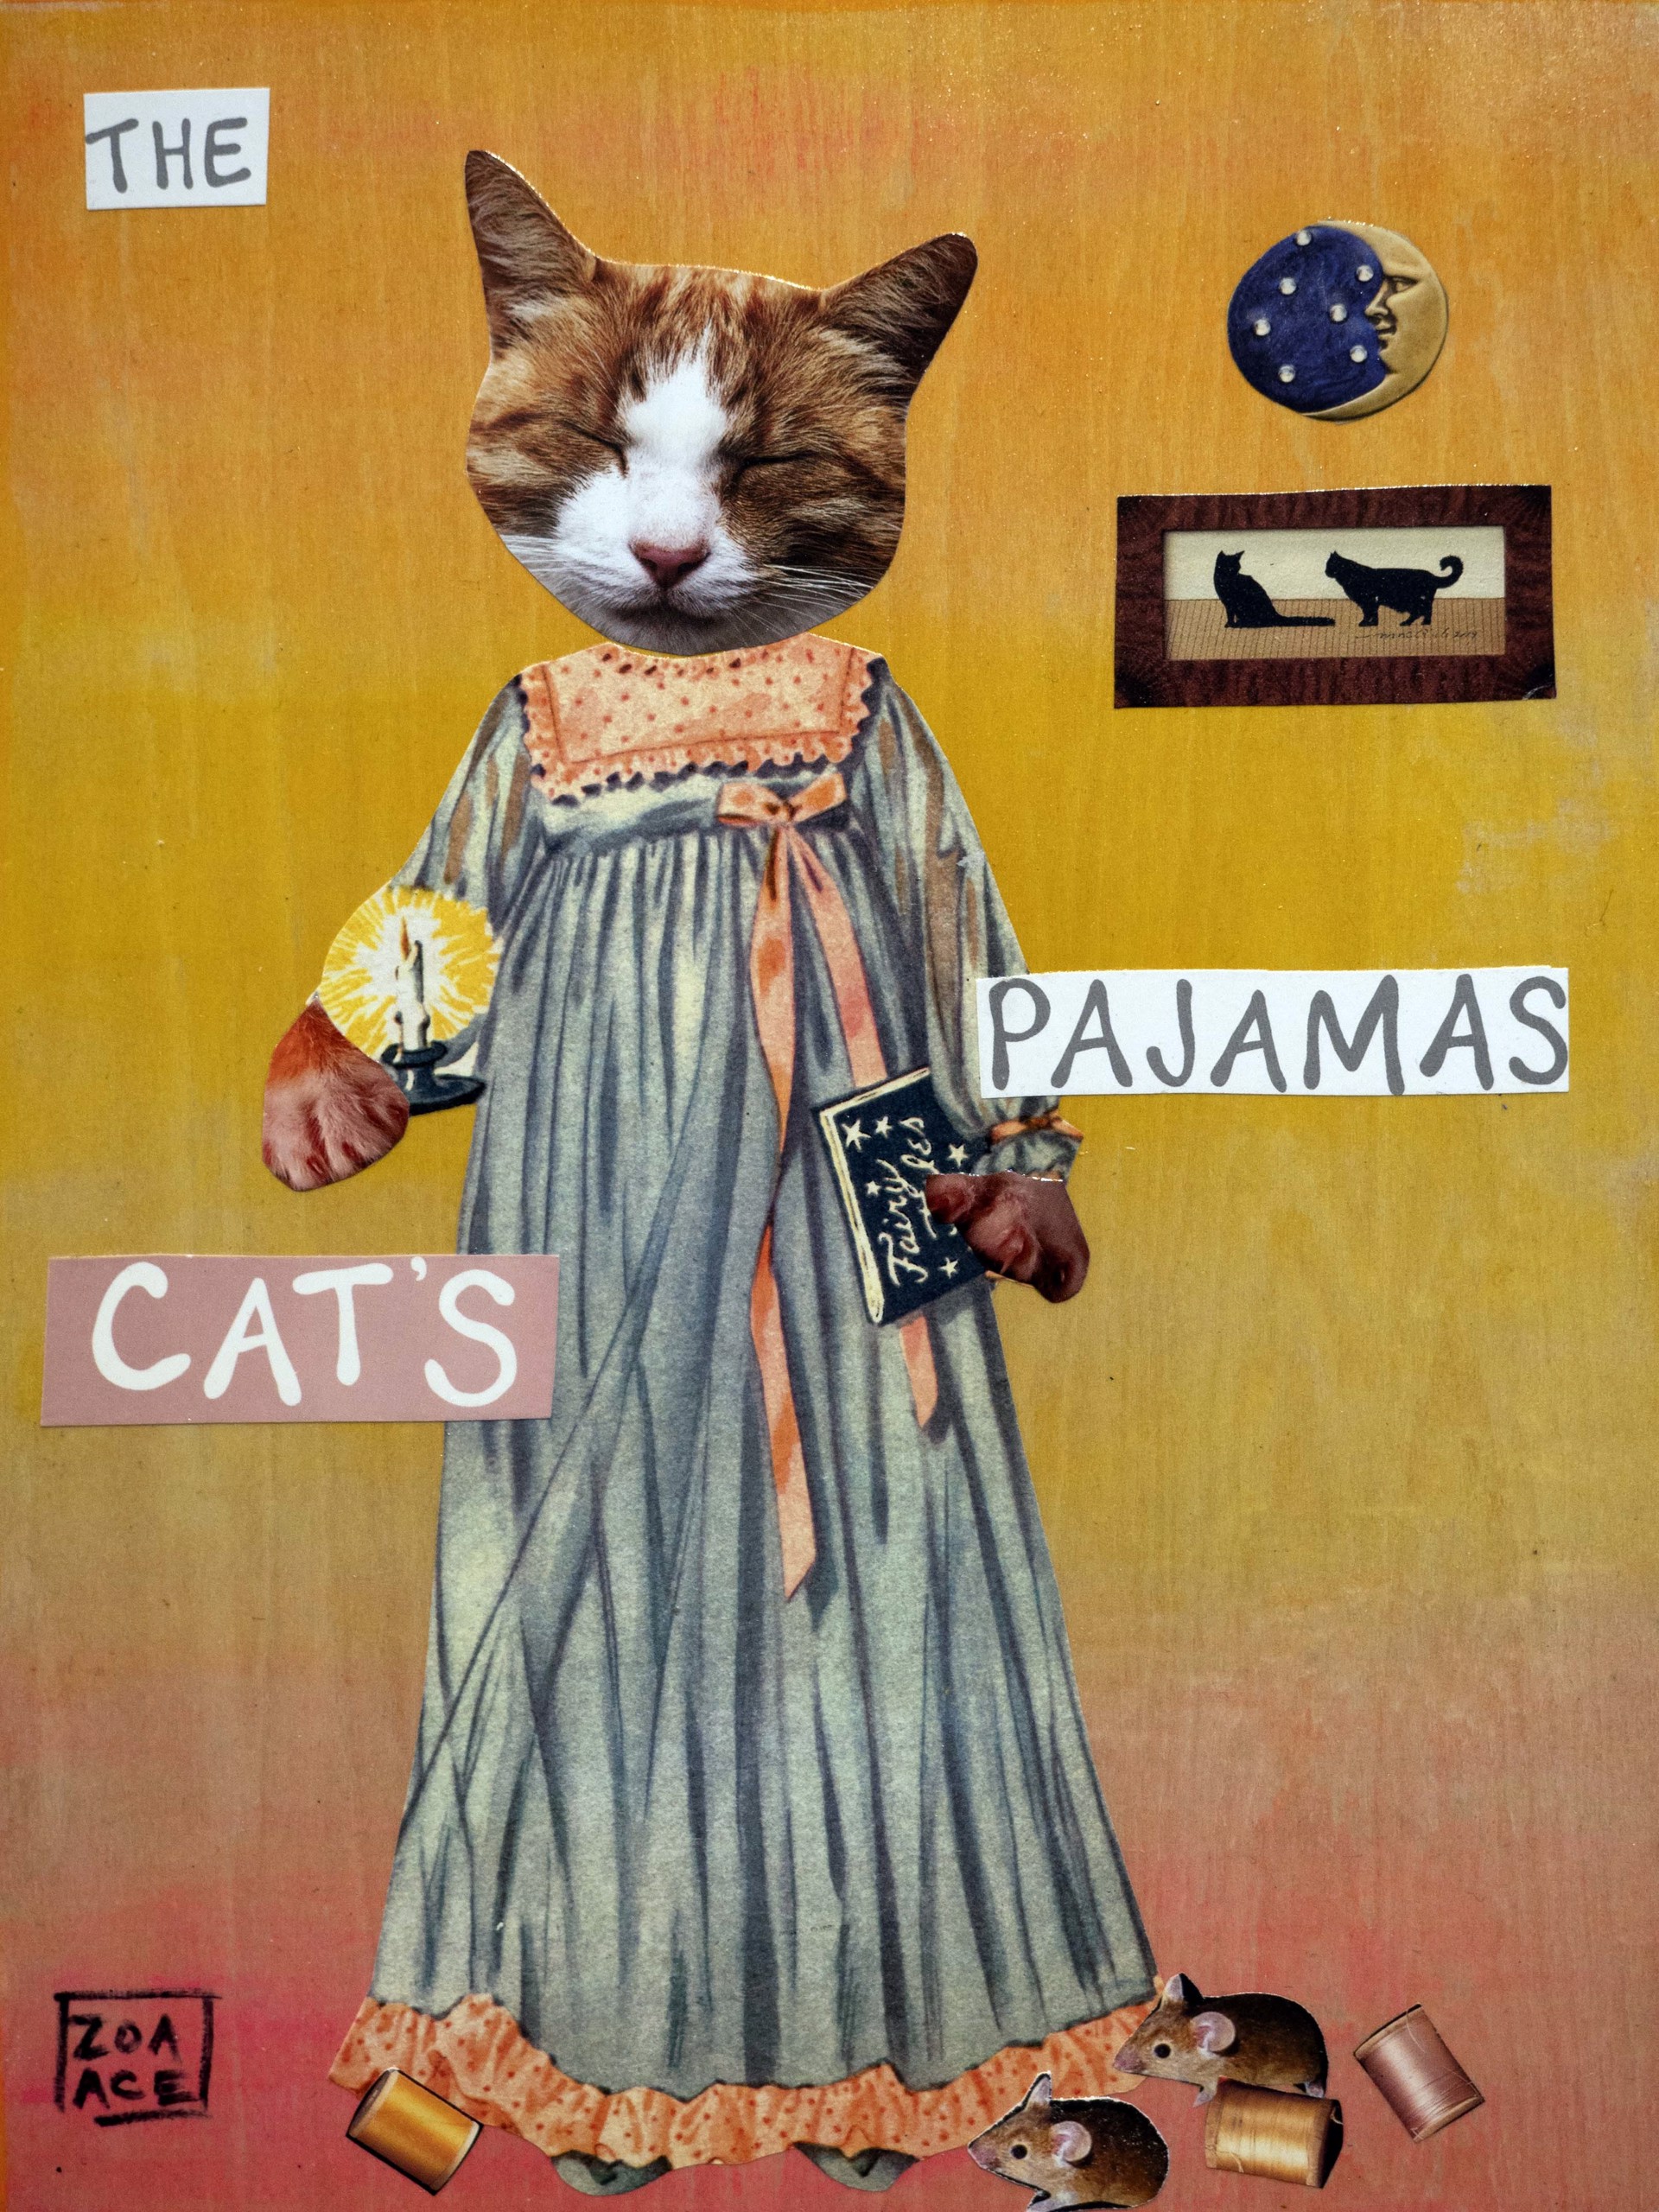 The Cat's Pajamas by Zoa Ace